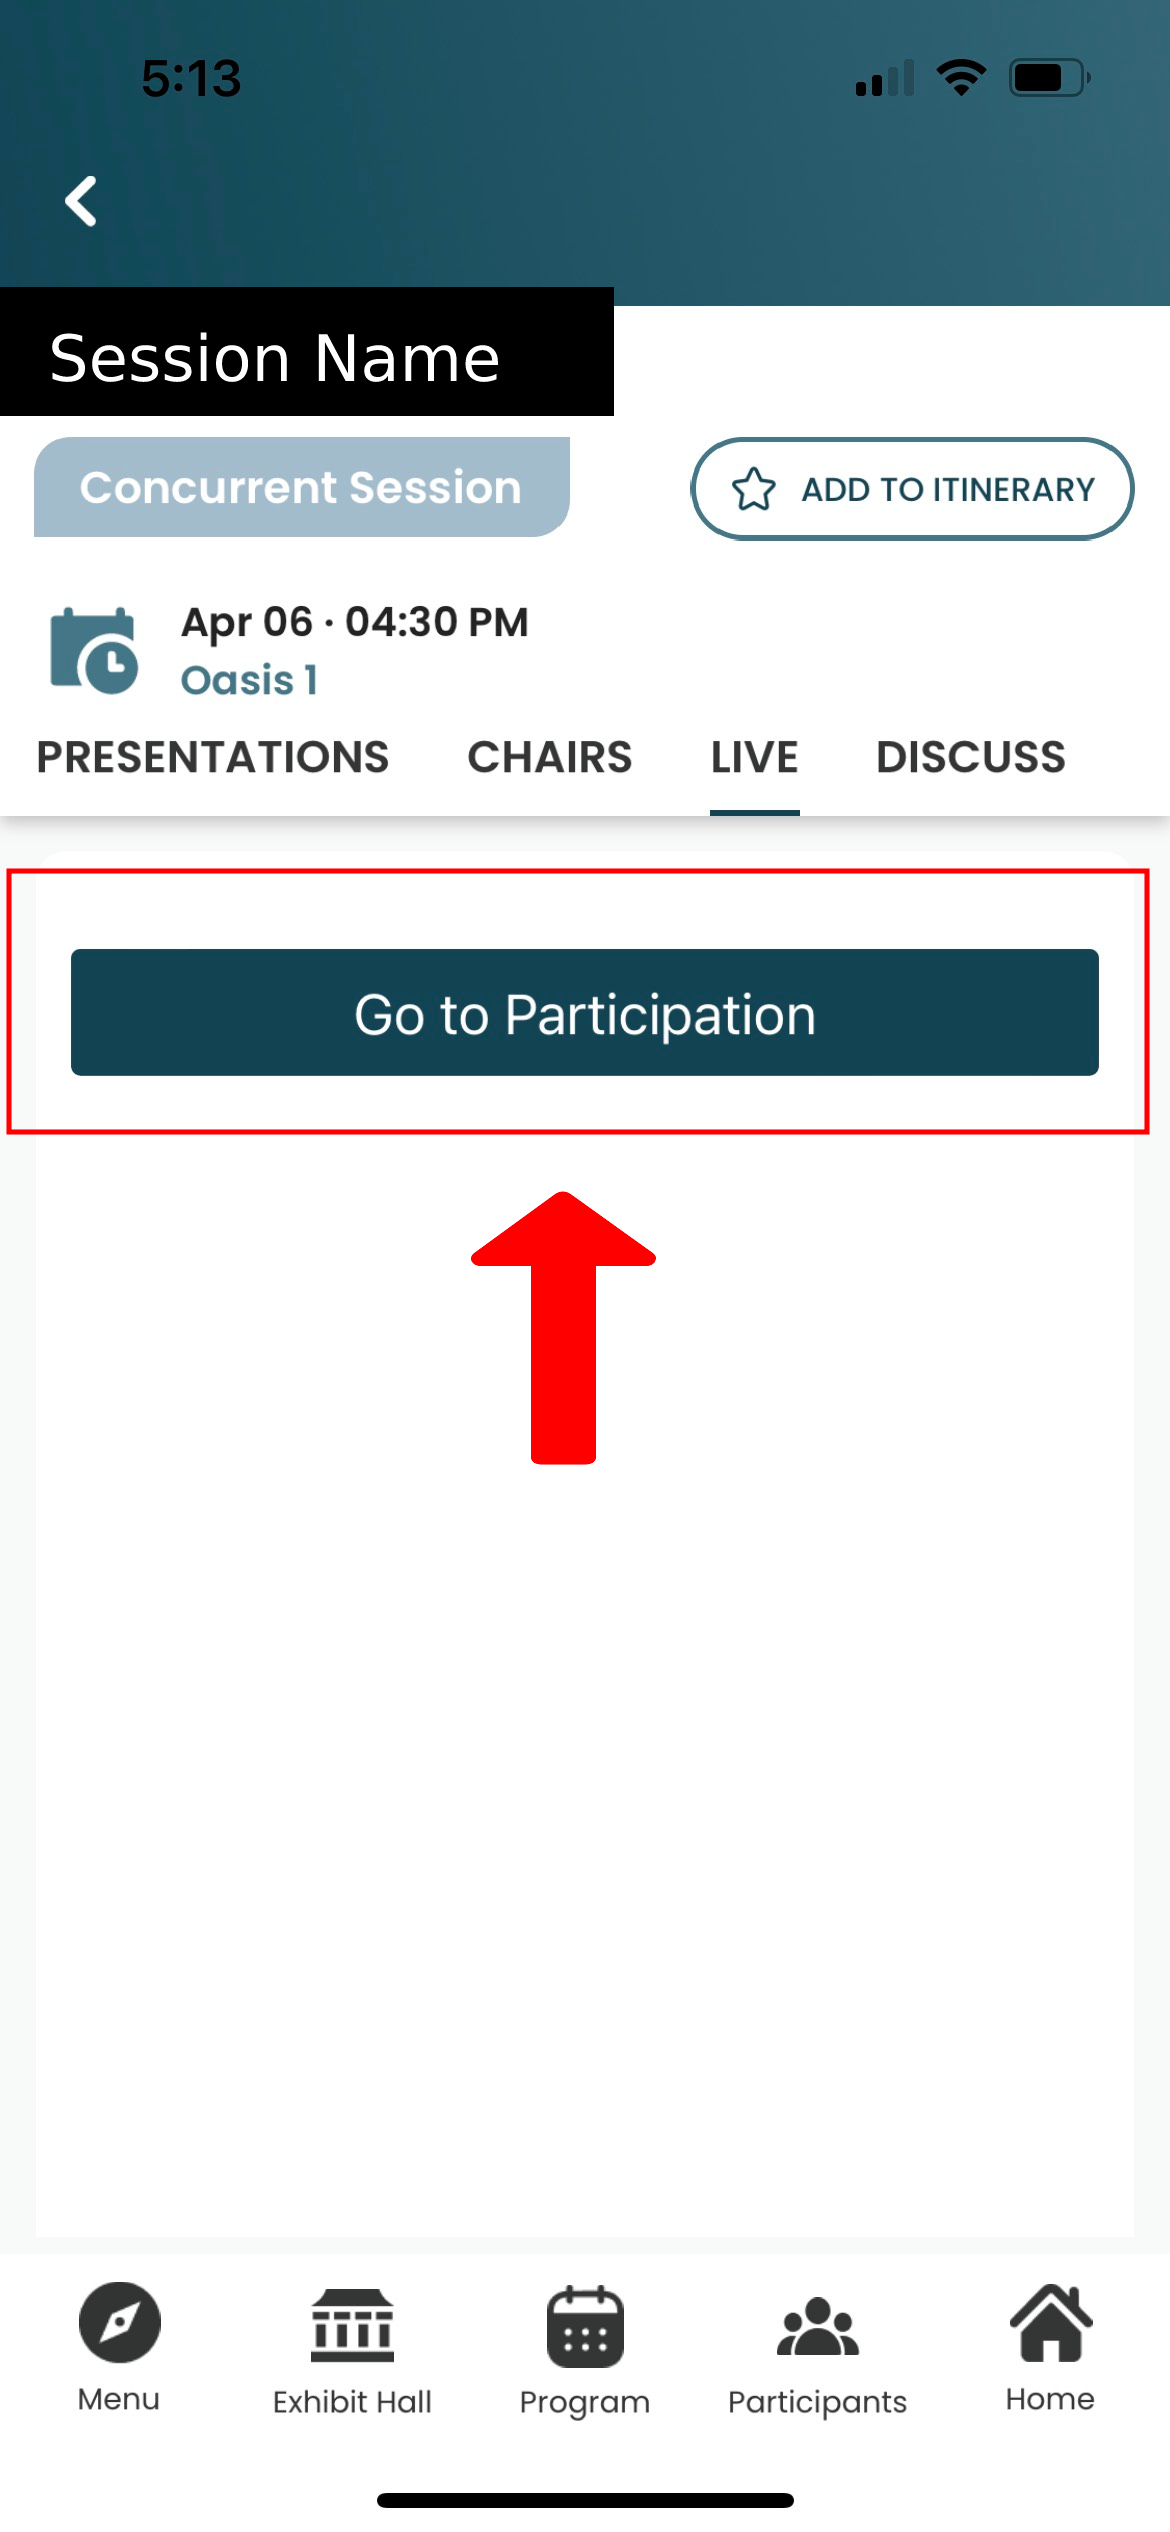 Go to Participation screen in mobile app